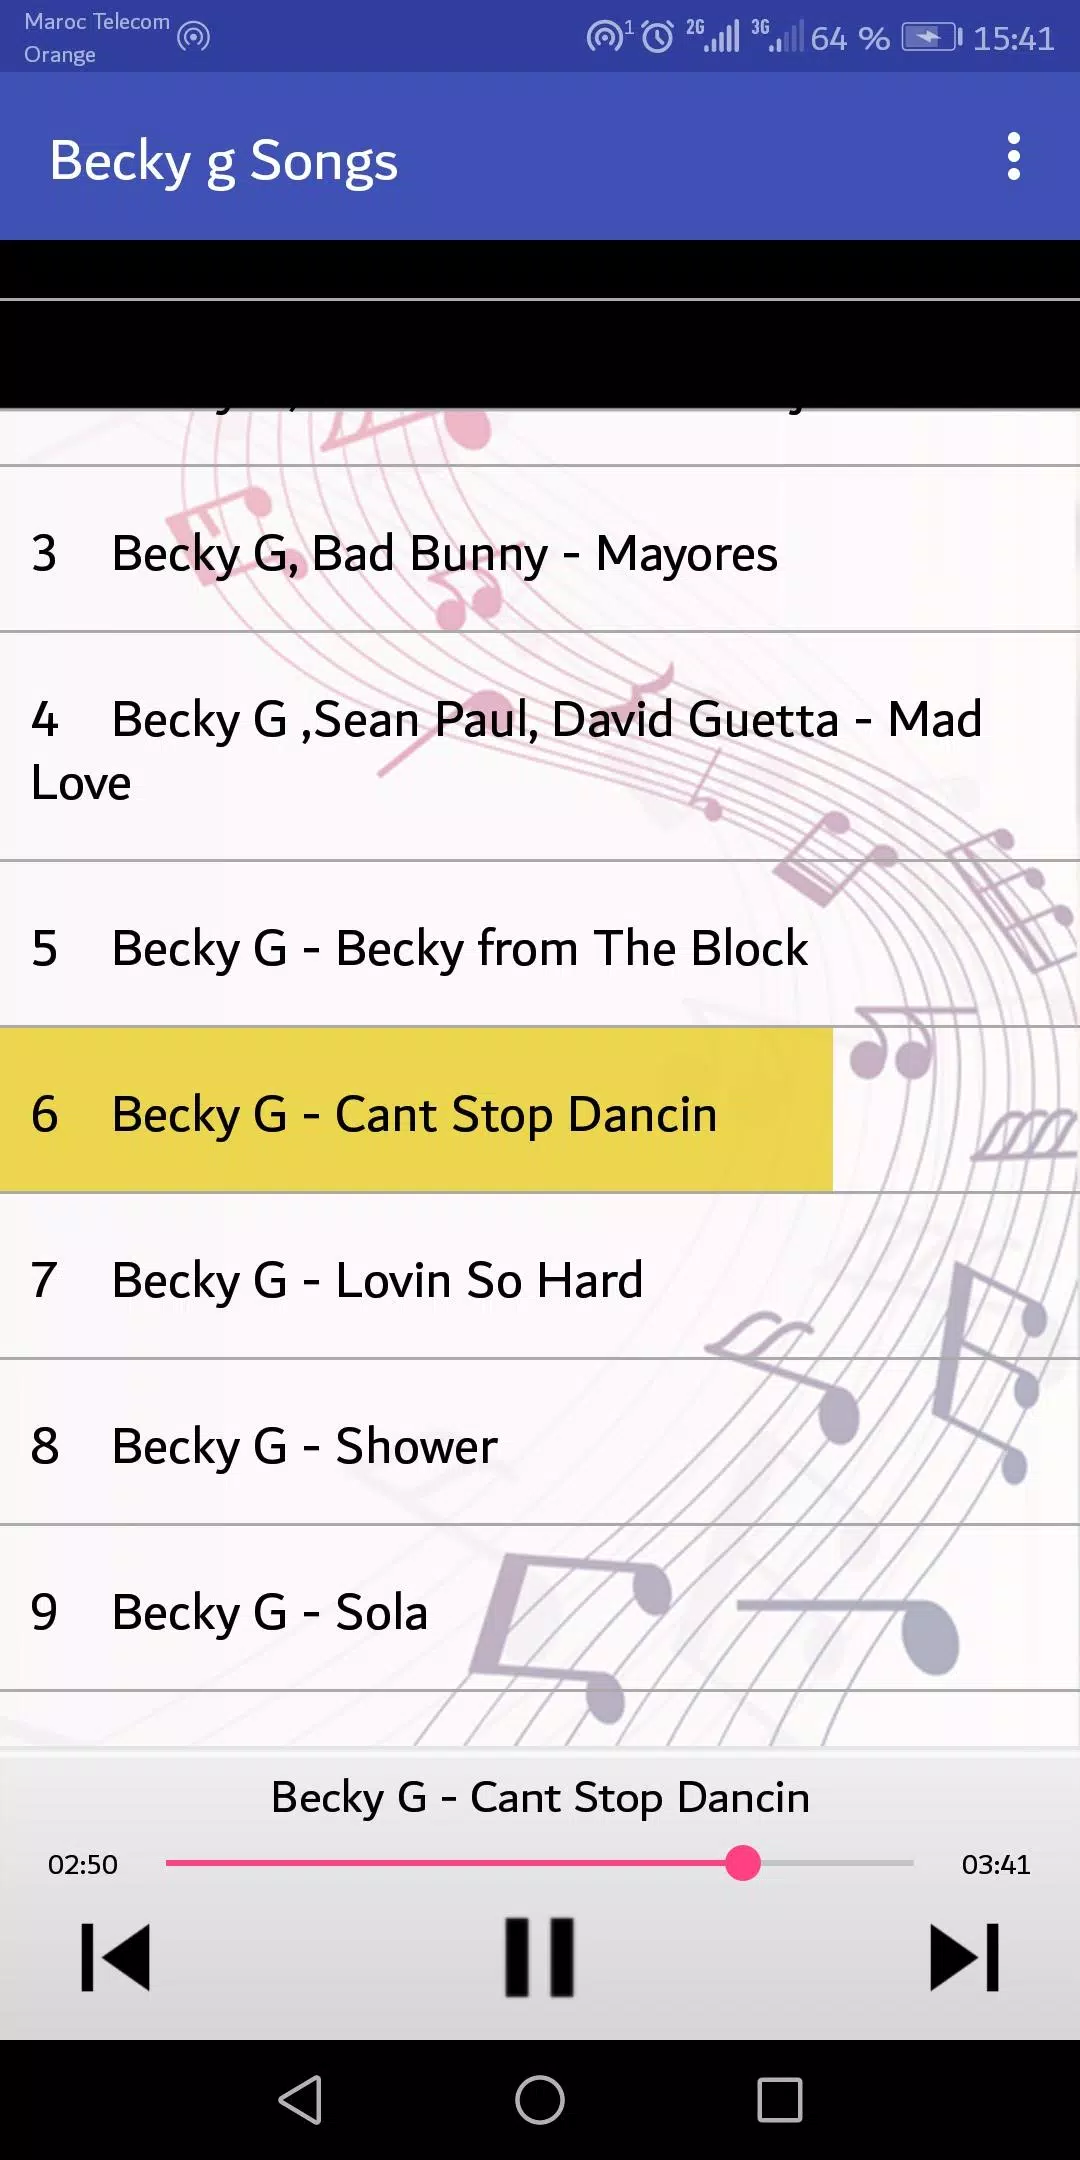 Best Becky g song MP3 for Android - APK Download